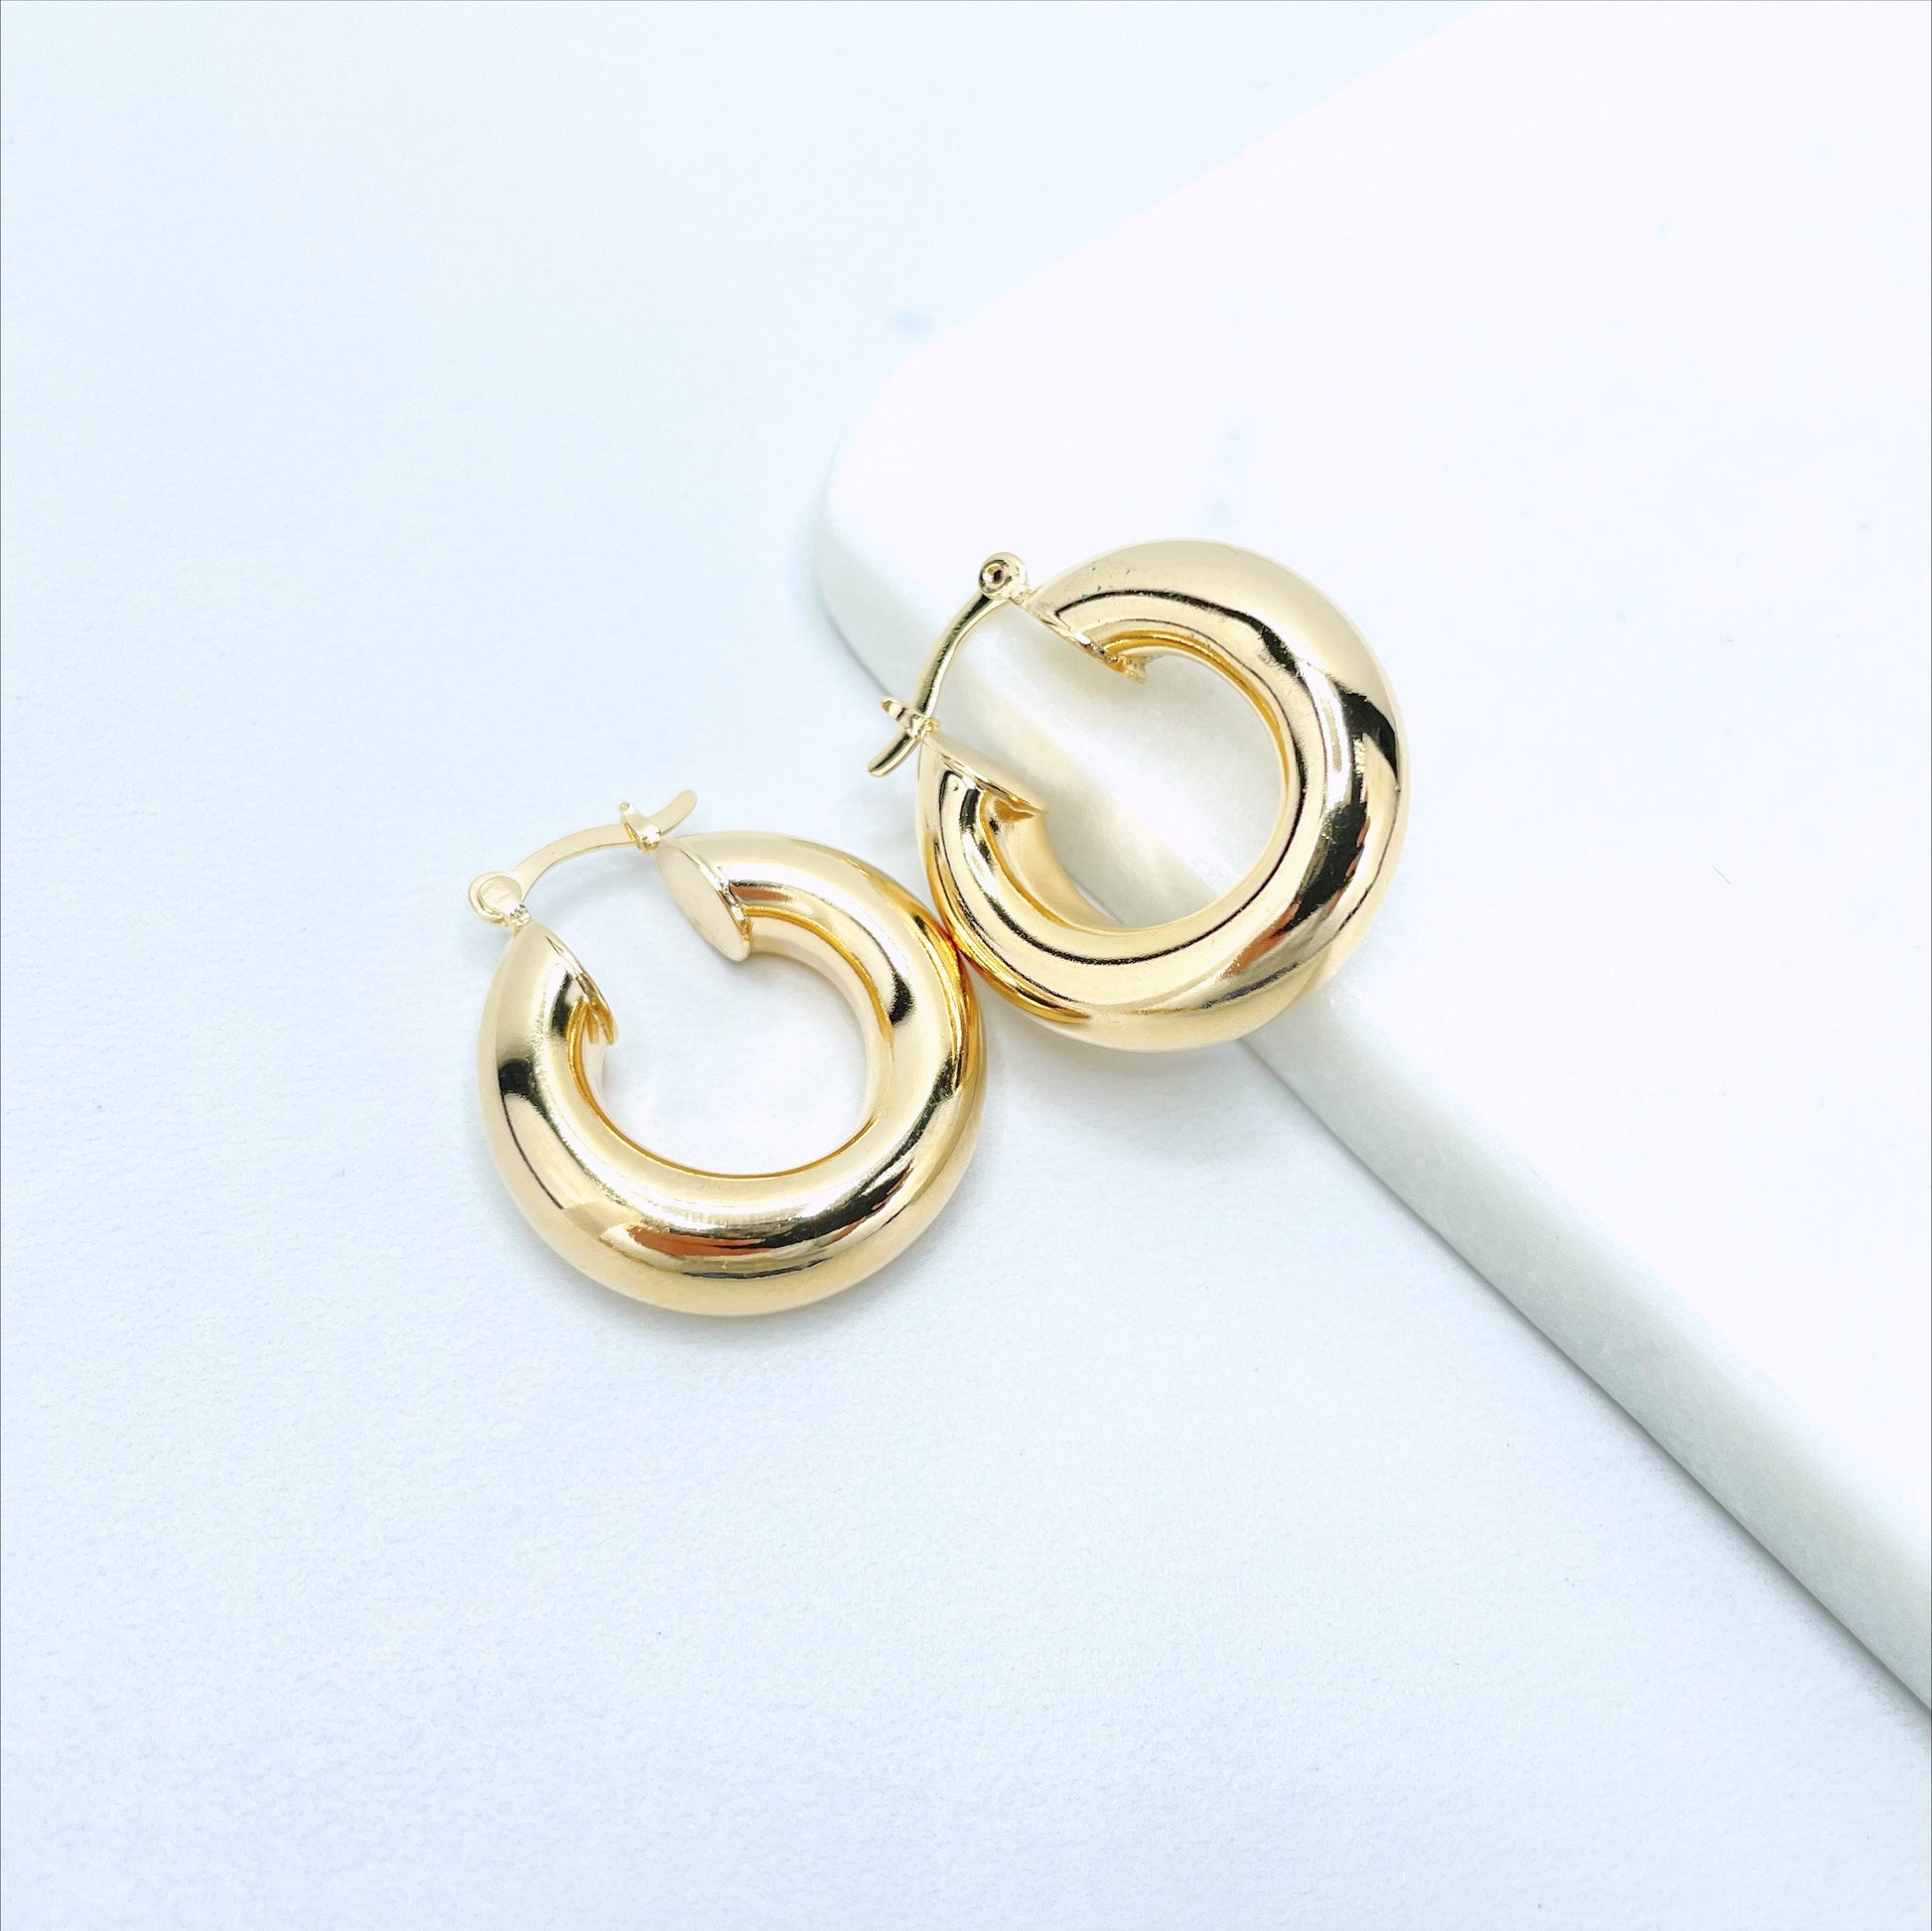 18k Gold Filled Light Tubular Hoops Earrings, Available in 25mm, 30mm, 35mm or 45mm, Wholesale Jewelry Making Supplies